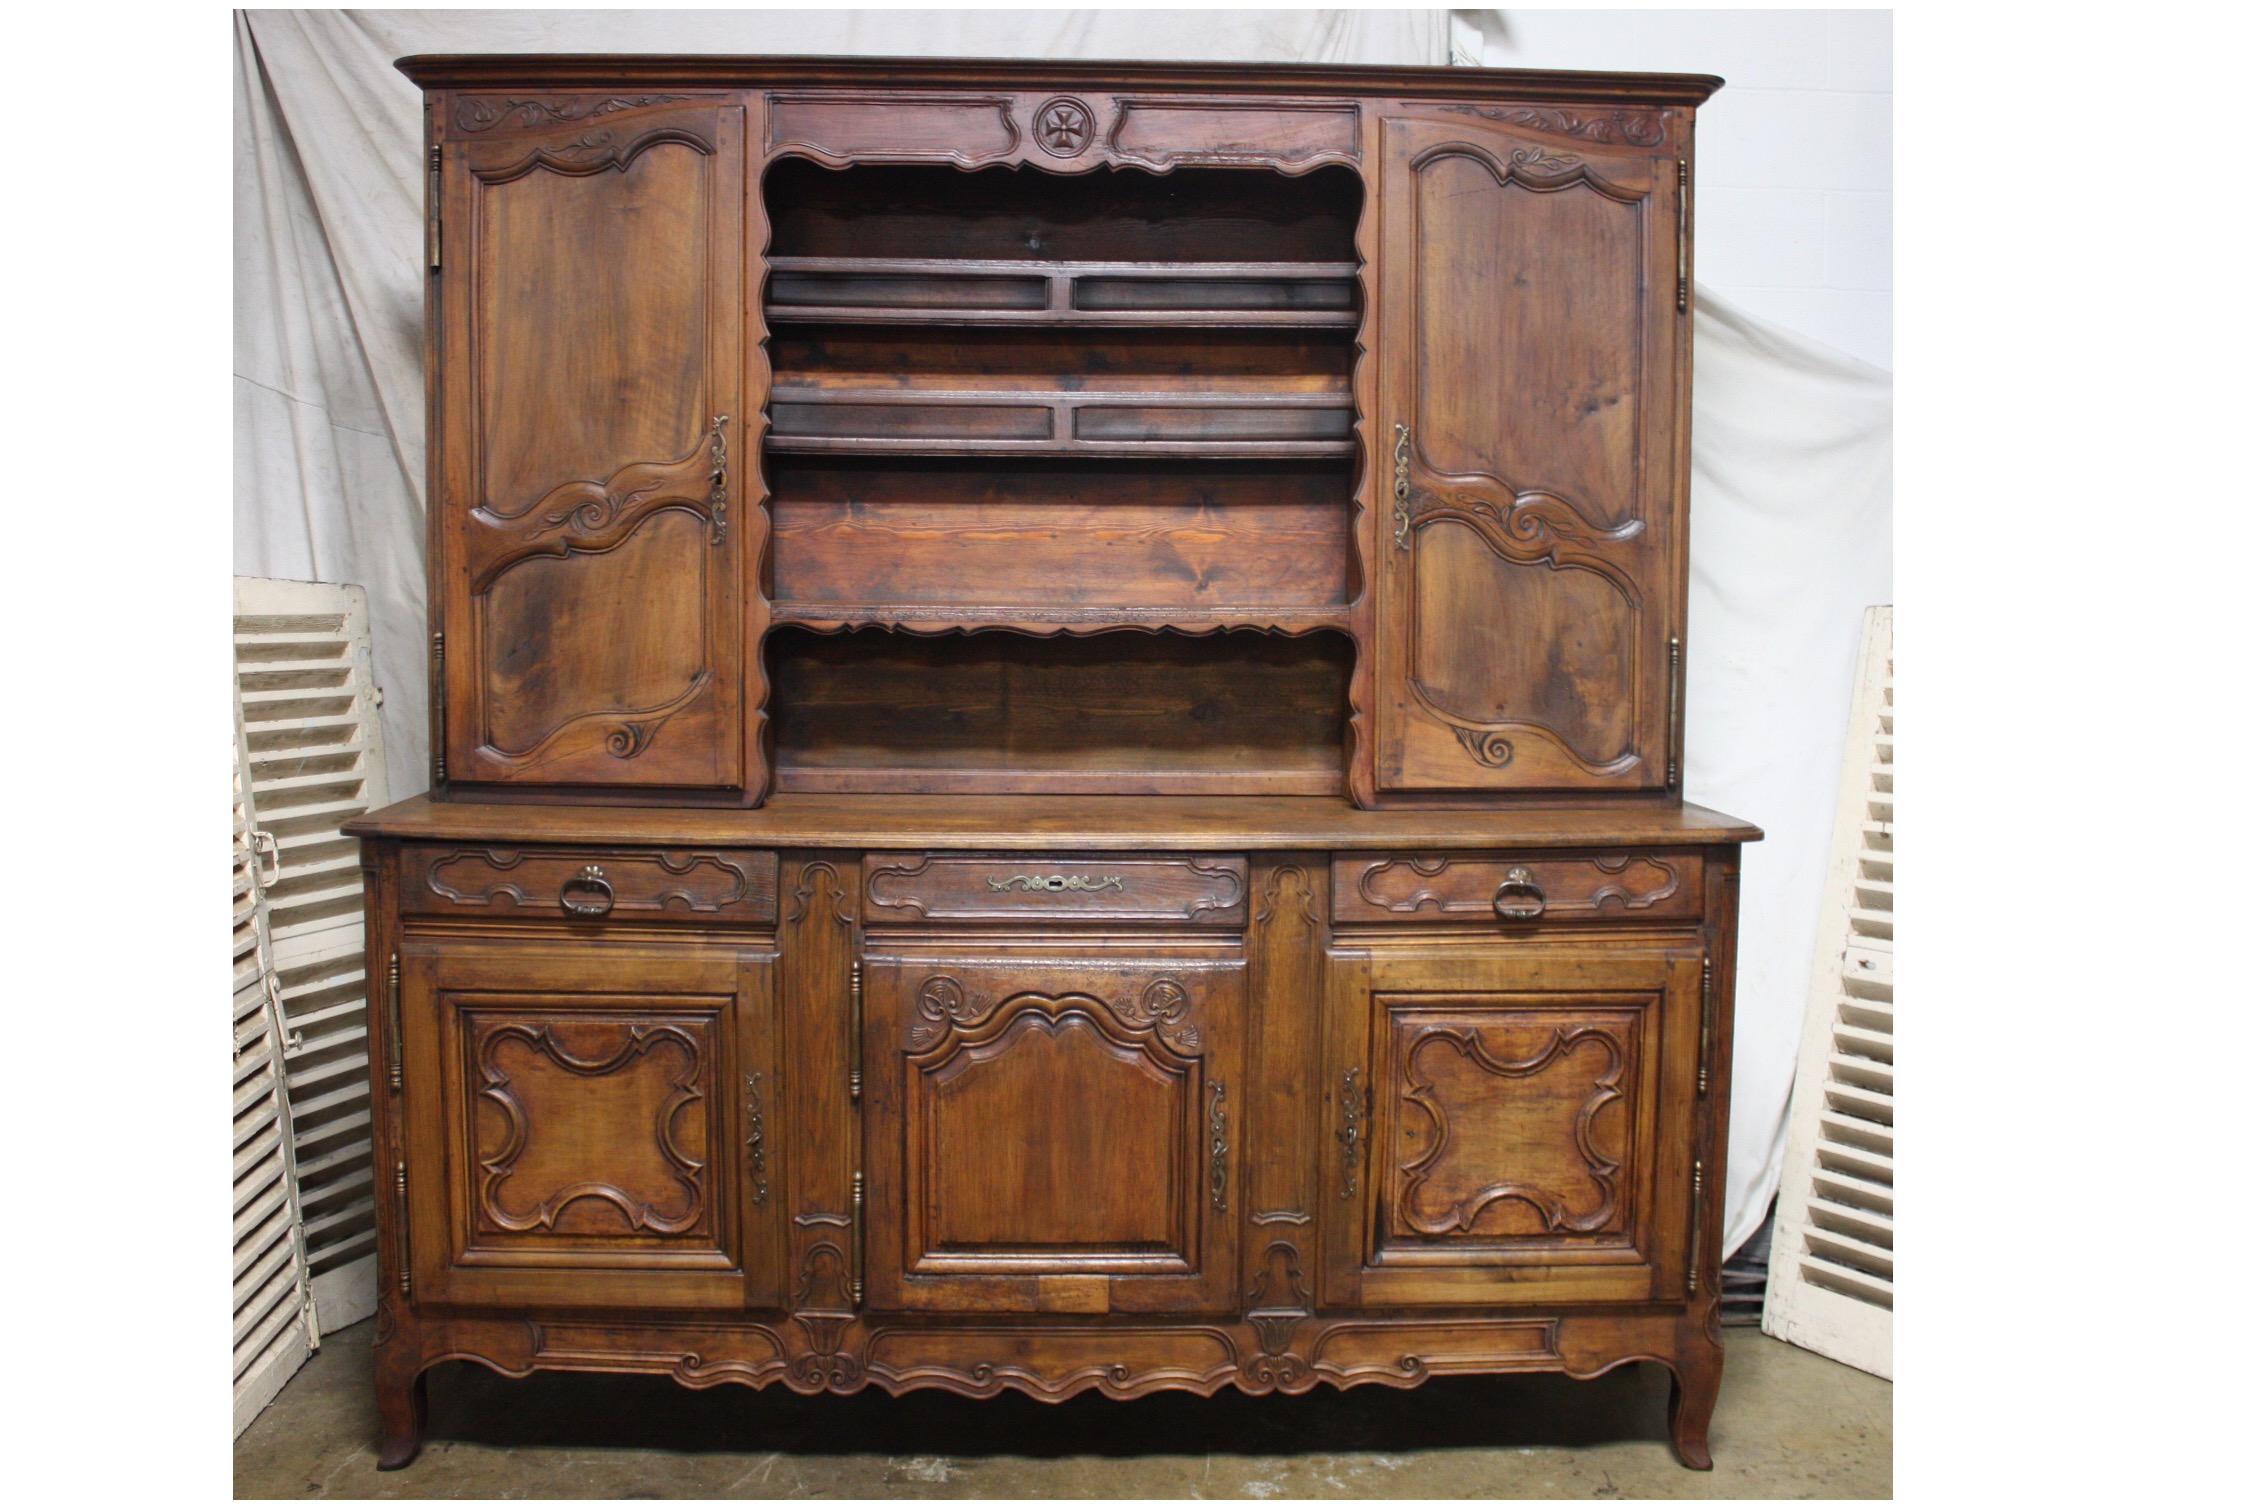 French 18th century sideboard.